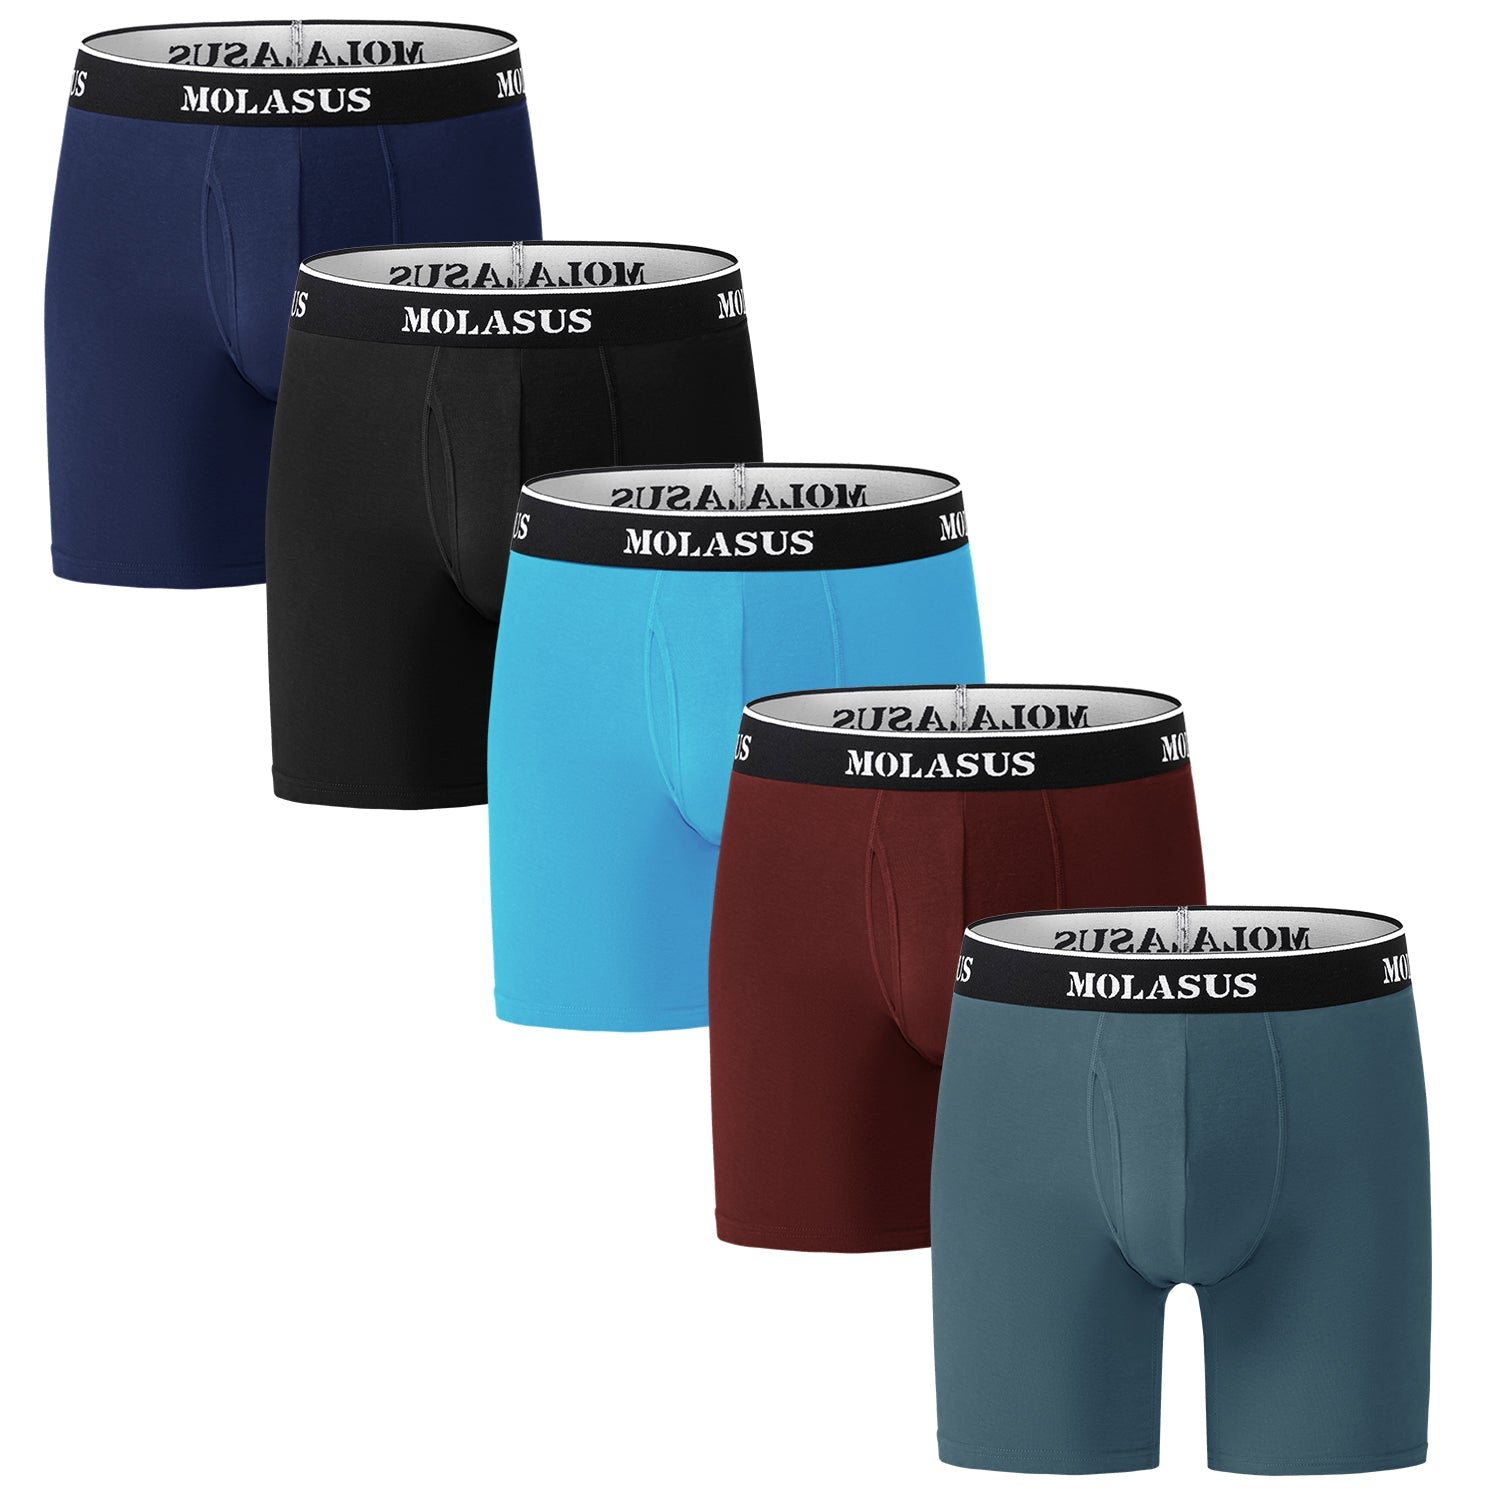 Molasus Mens Boxer Briefs Soft Cotton Underwear Open Fly Tagless Underpants Pack of 5 Multicolor